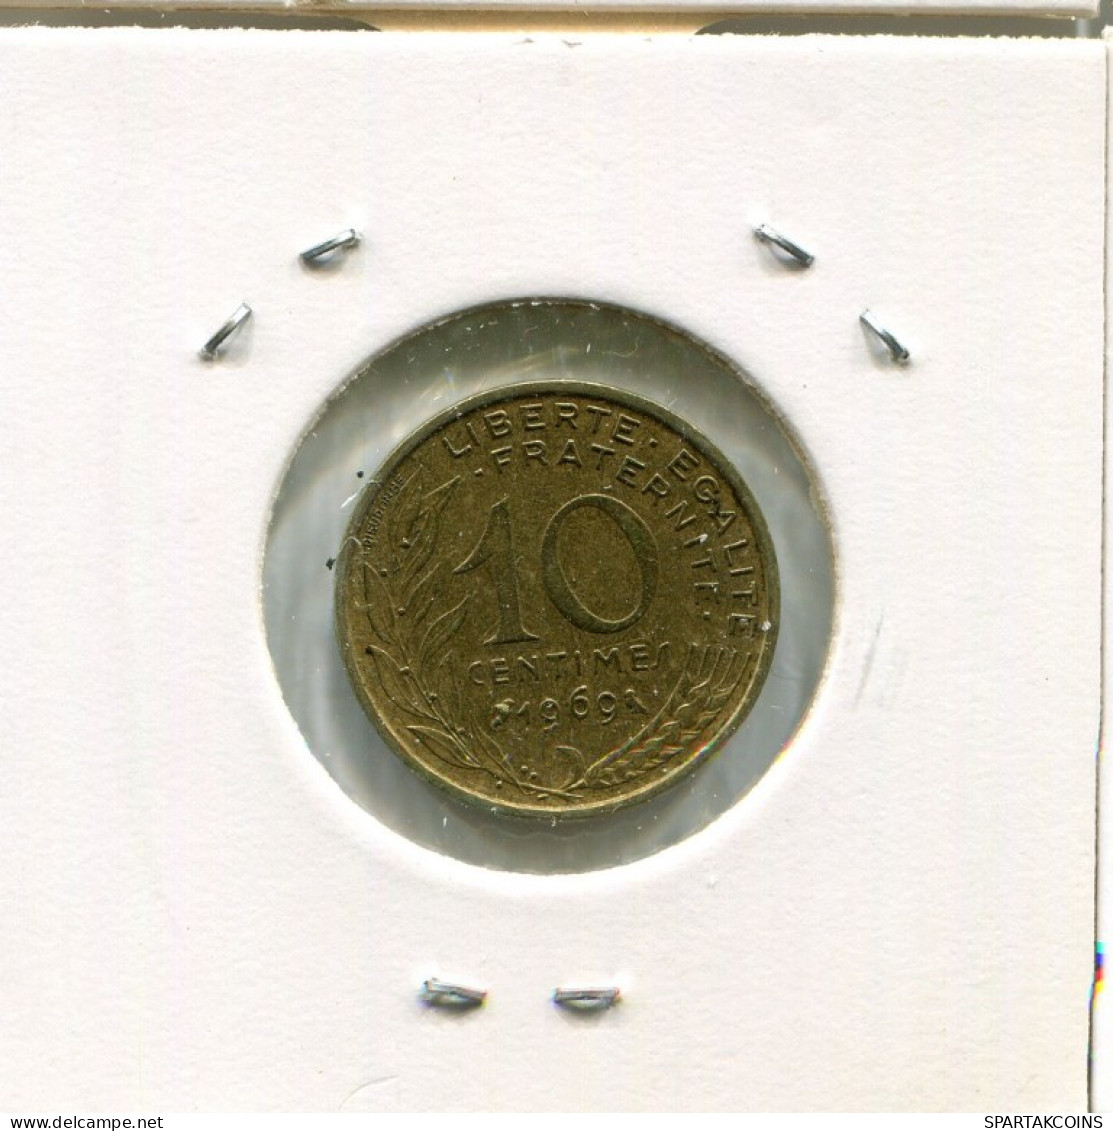 10 CENTIMES 1969 FRANCE Coin French Coin #AN837.U.A - 10 Centimes